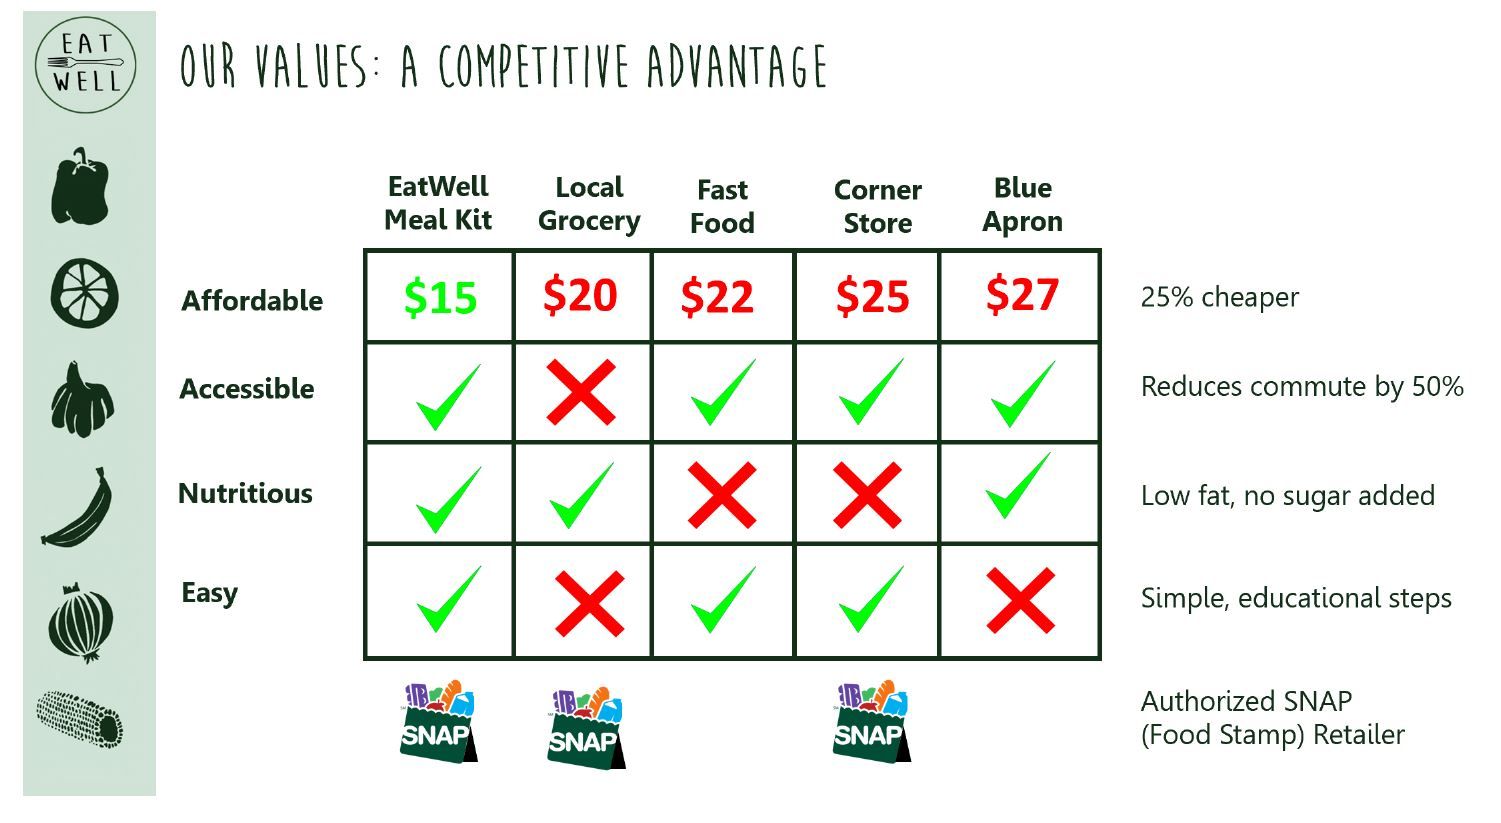 EatWell's Competitive Positioning